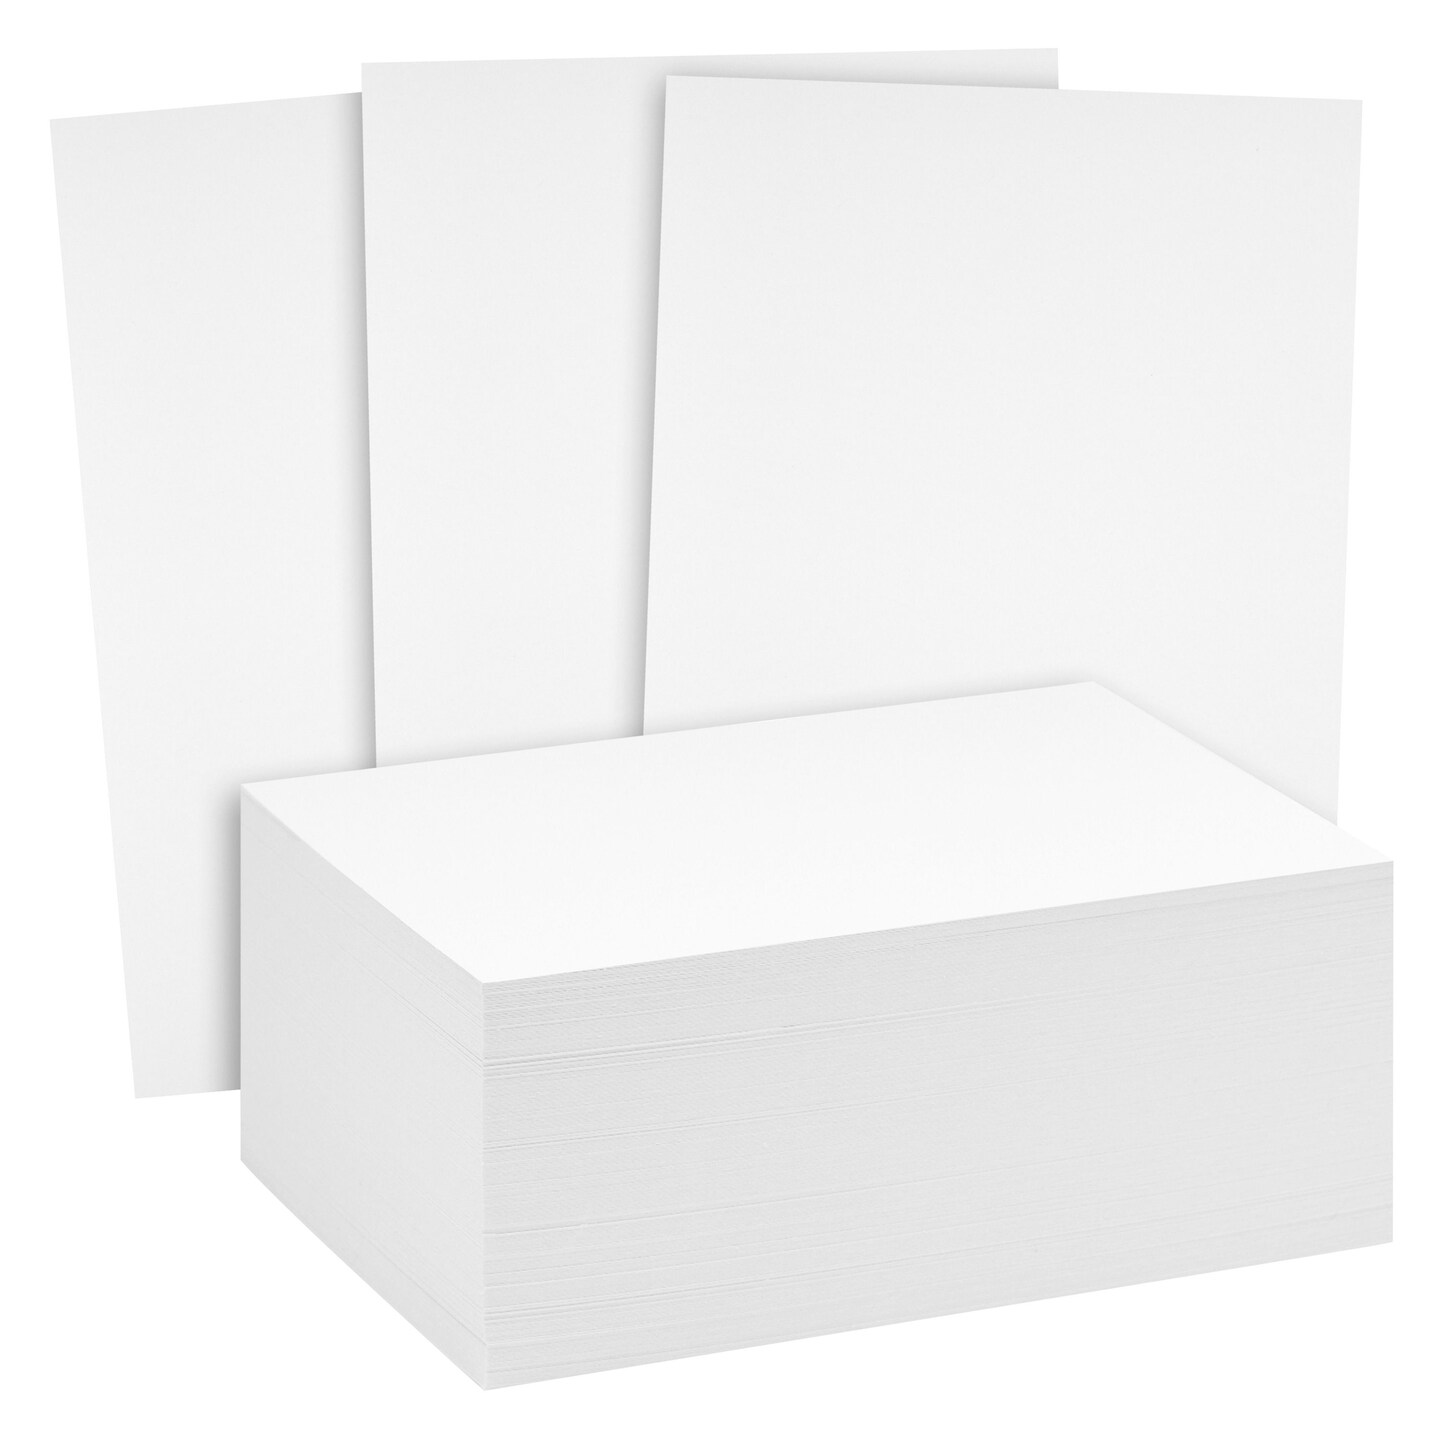  Reskid 100 Pack of White Cardstock - Thick Paper - 5 x 7  Blank Heavy Weight 110lb/14pt Cover Card Stock - Great For Invitations,  Announcements and More (5x7, inches) : Arts, Crafts & Sewing